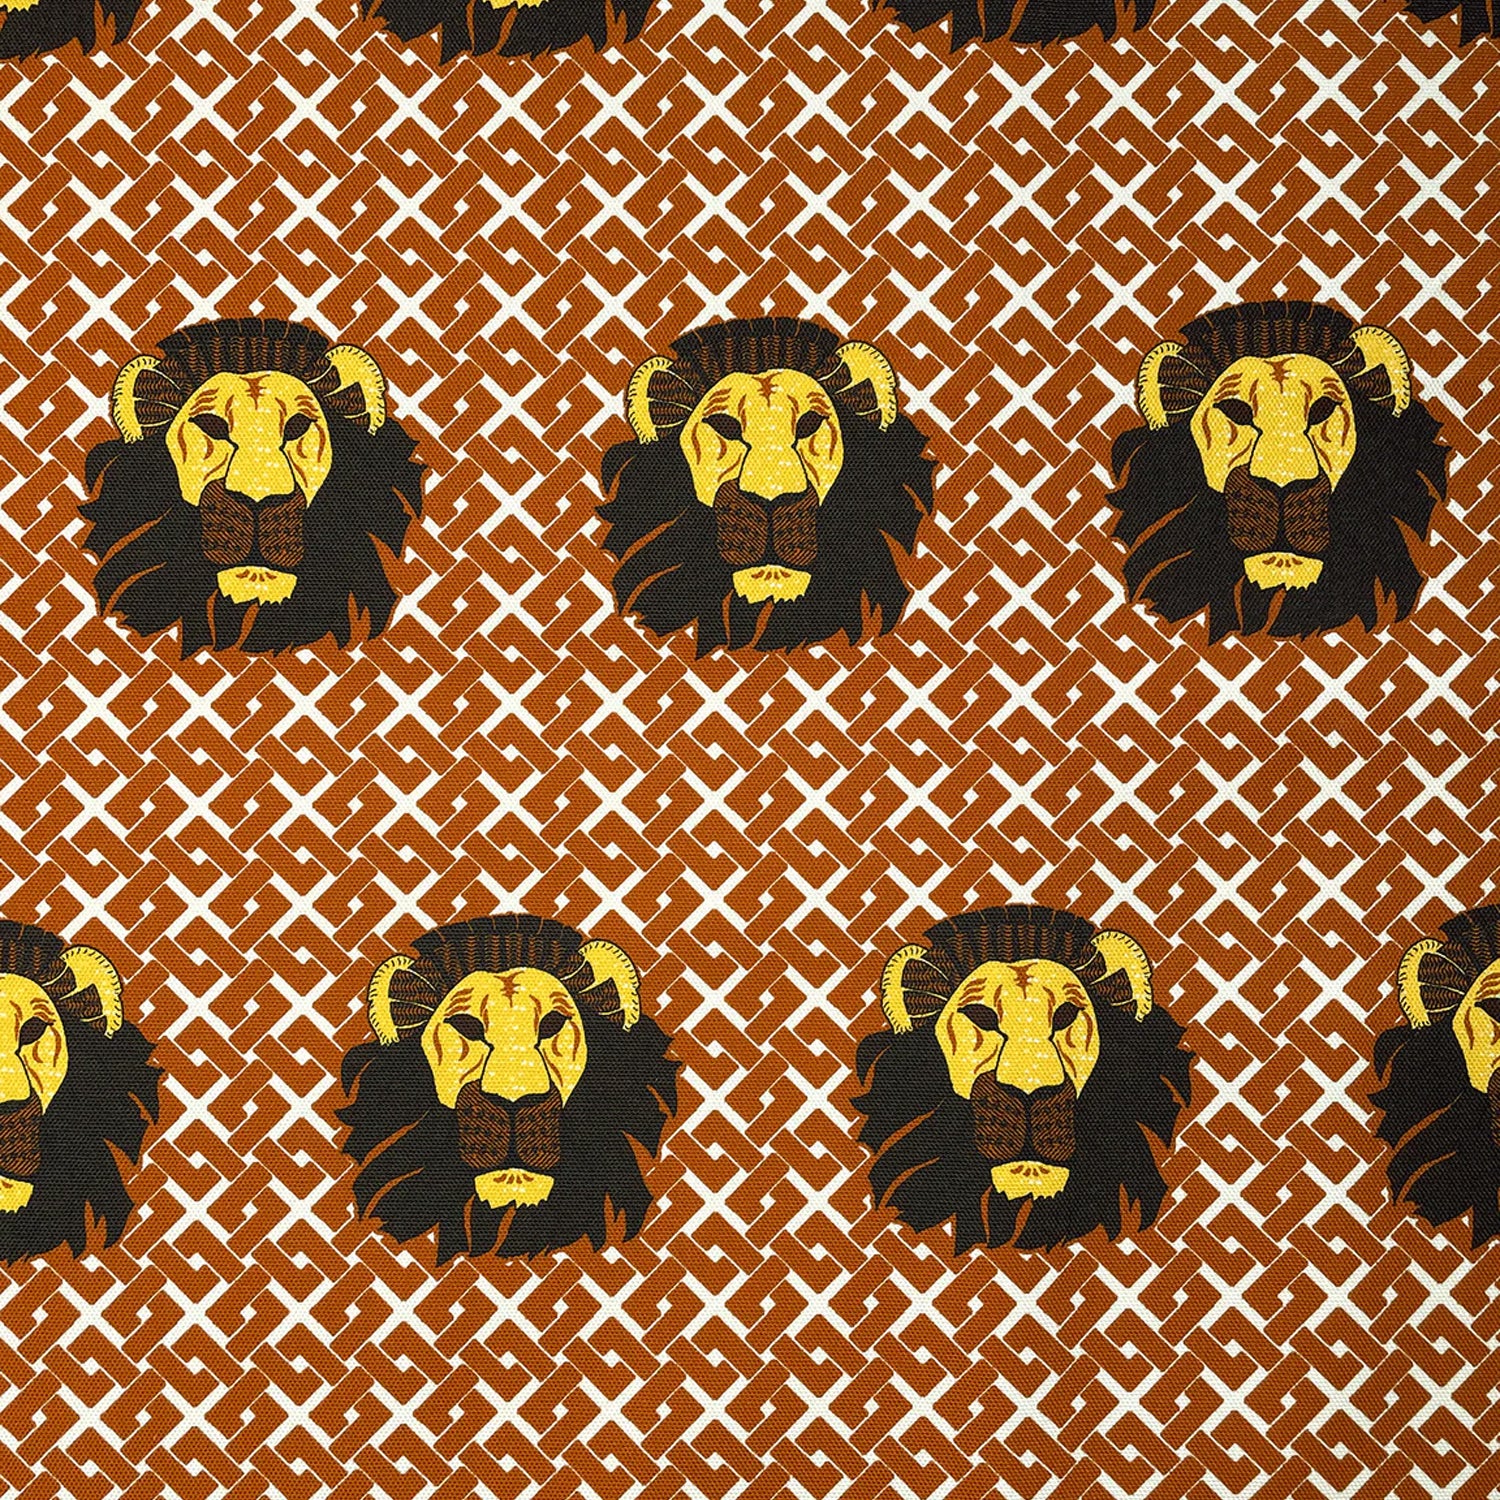 Detail of fabric in a repeating lion face print on a geometric field in shades of red, brown and yellow.